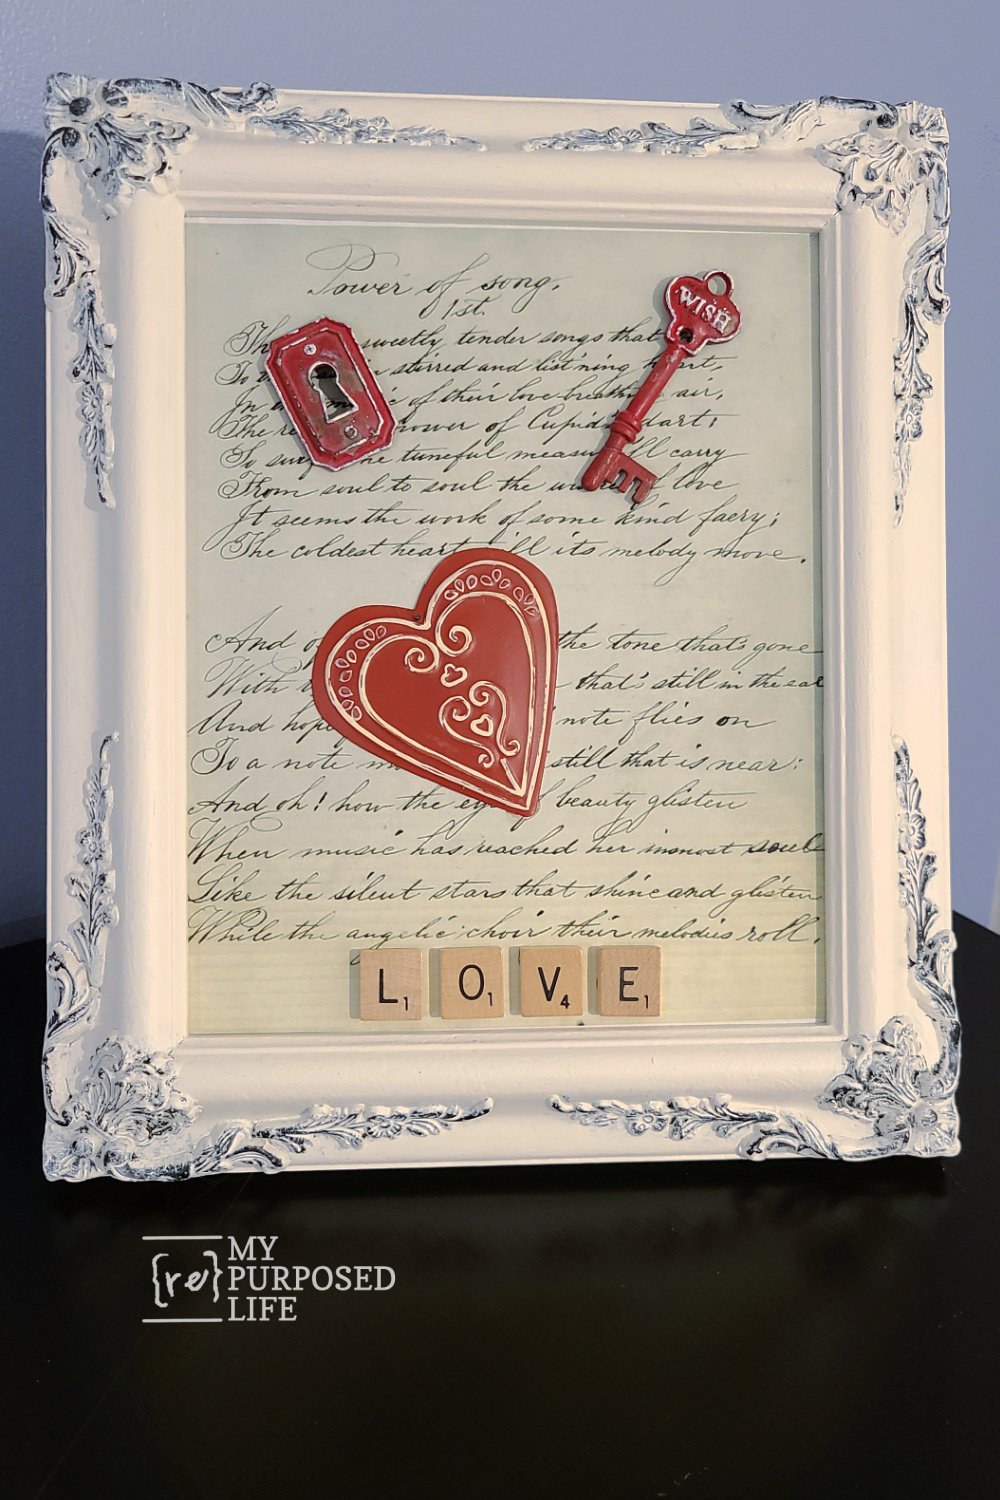 Easy Picture Frame Valentine project. Perfect as a gift, home decor, or even as a wedding gift. Step by step directions and tips to DIY it. #MyRepurposedLife #repurposed #pictureframe #diy #easy #project #valentine #wedding #homedecor via @repurposedlife